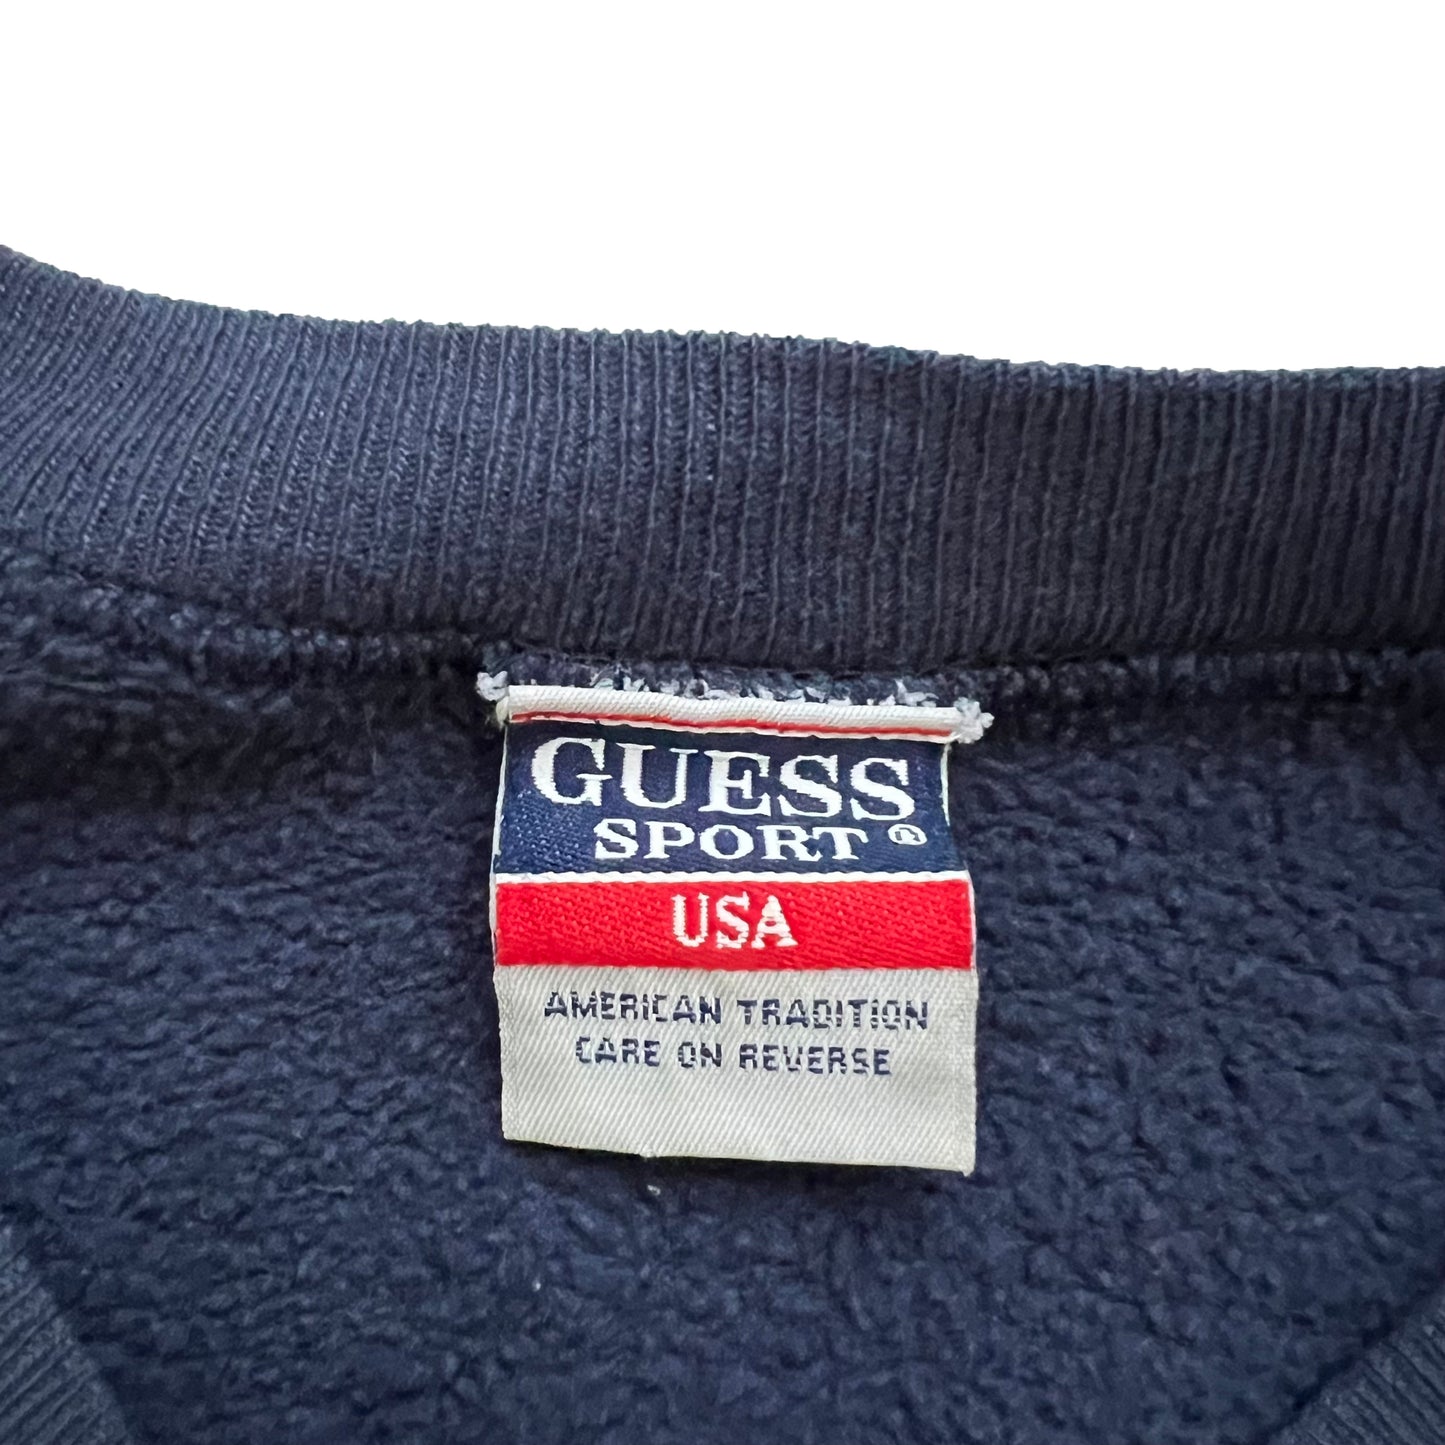 90's GUESS SPORT SWEATSHIRT "MADE IN USA"